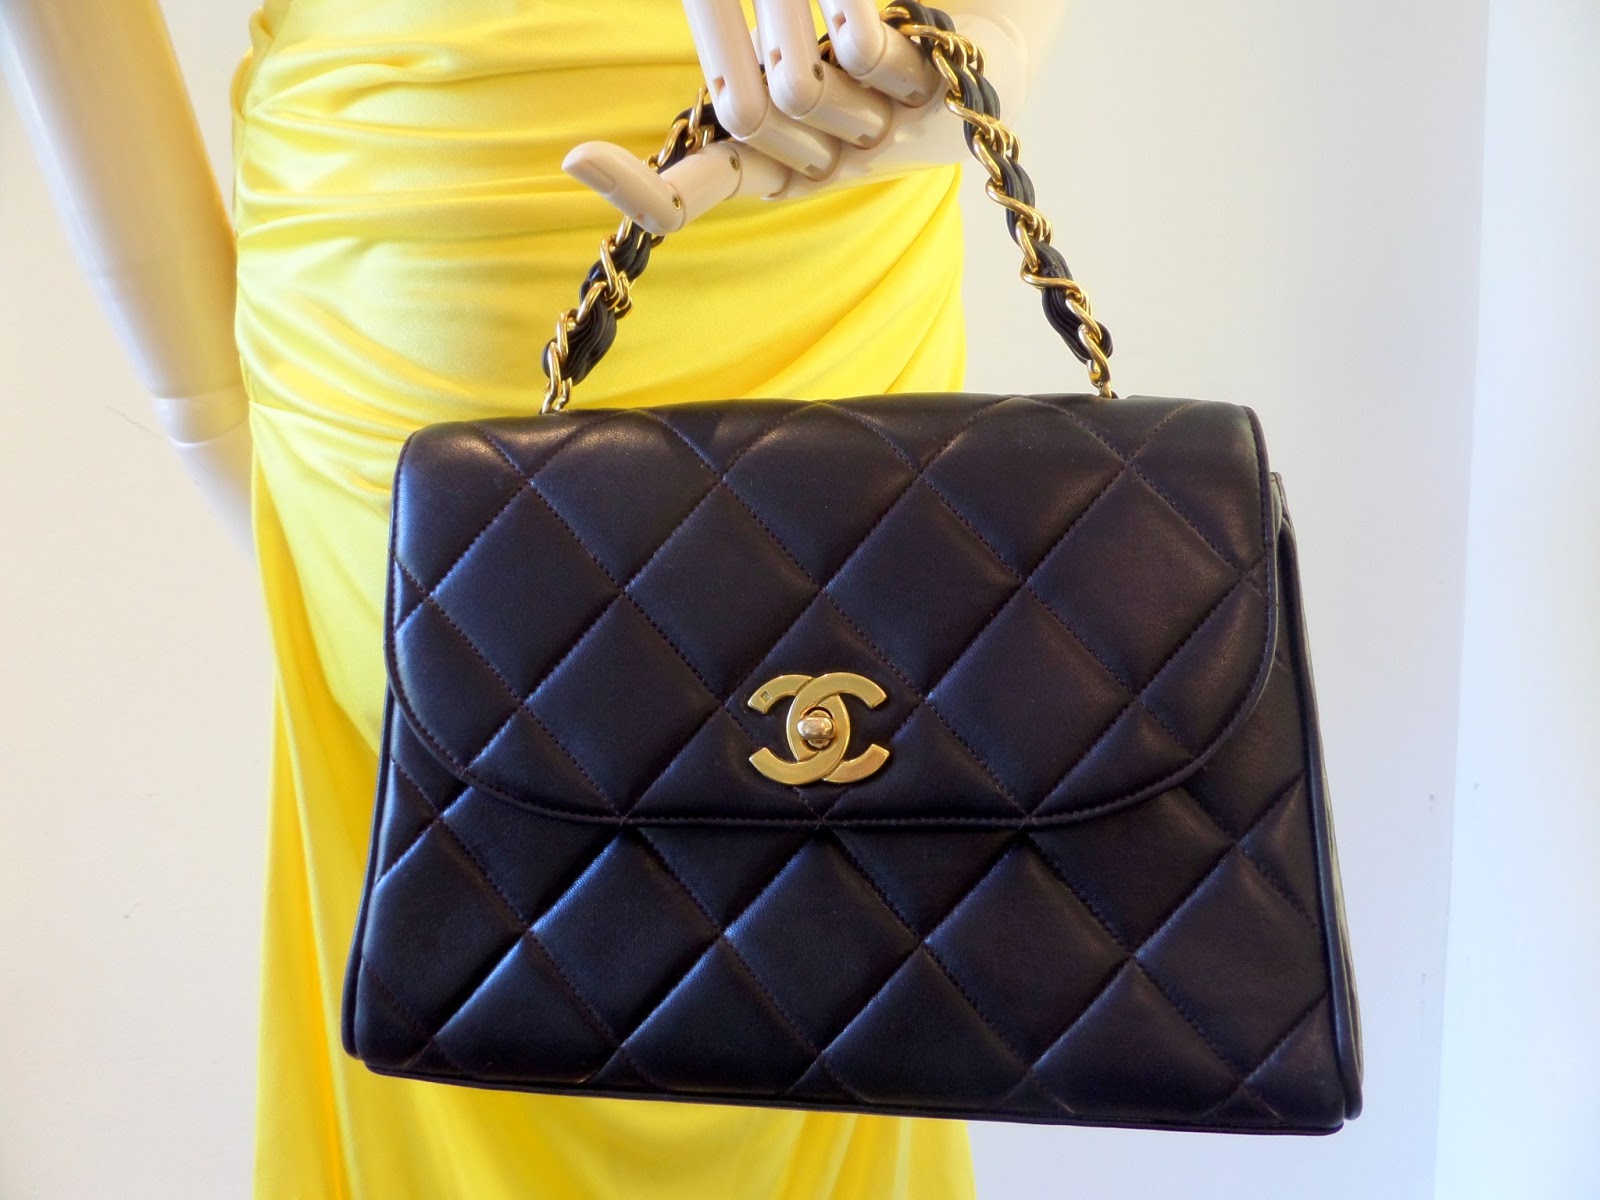 Vancouver Luxury Designer Consignment Shop 二手奢侈品寄卖店: Chanel Kelly Bag ~  Vancouver best consignment store Once Again Resale